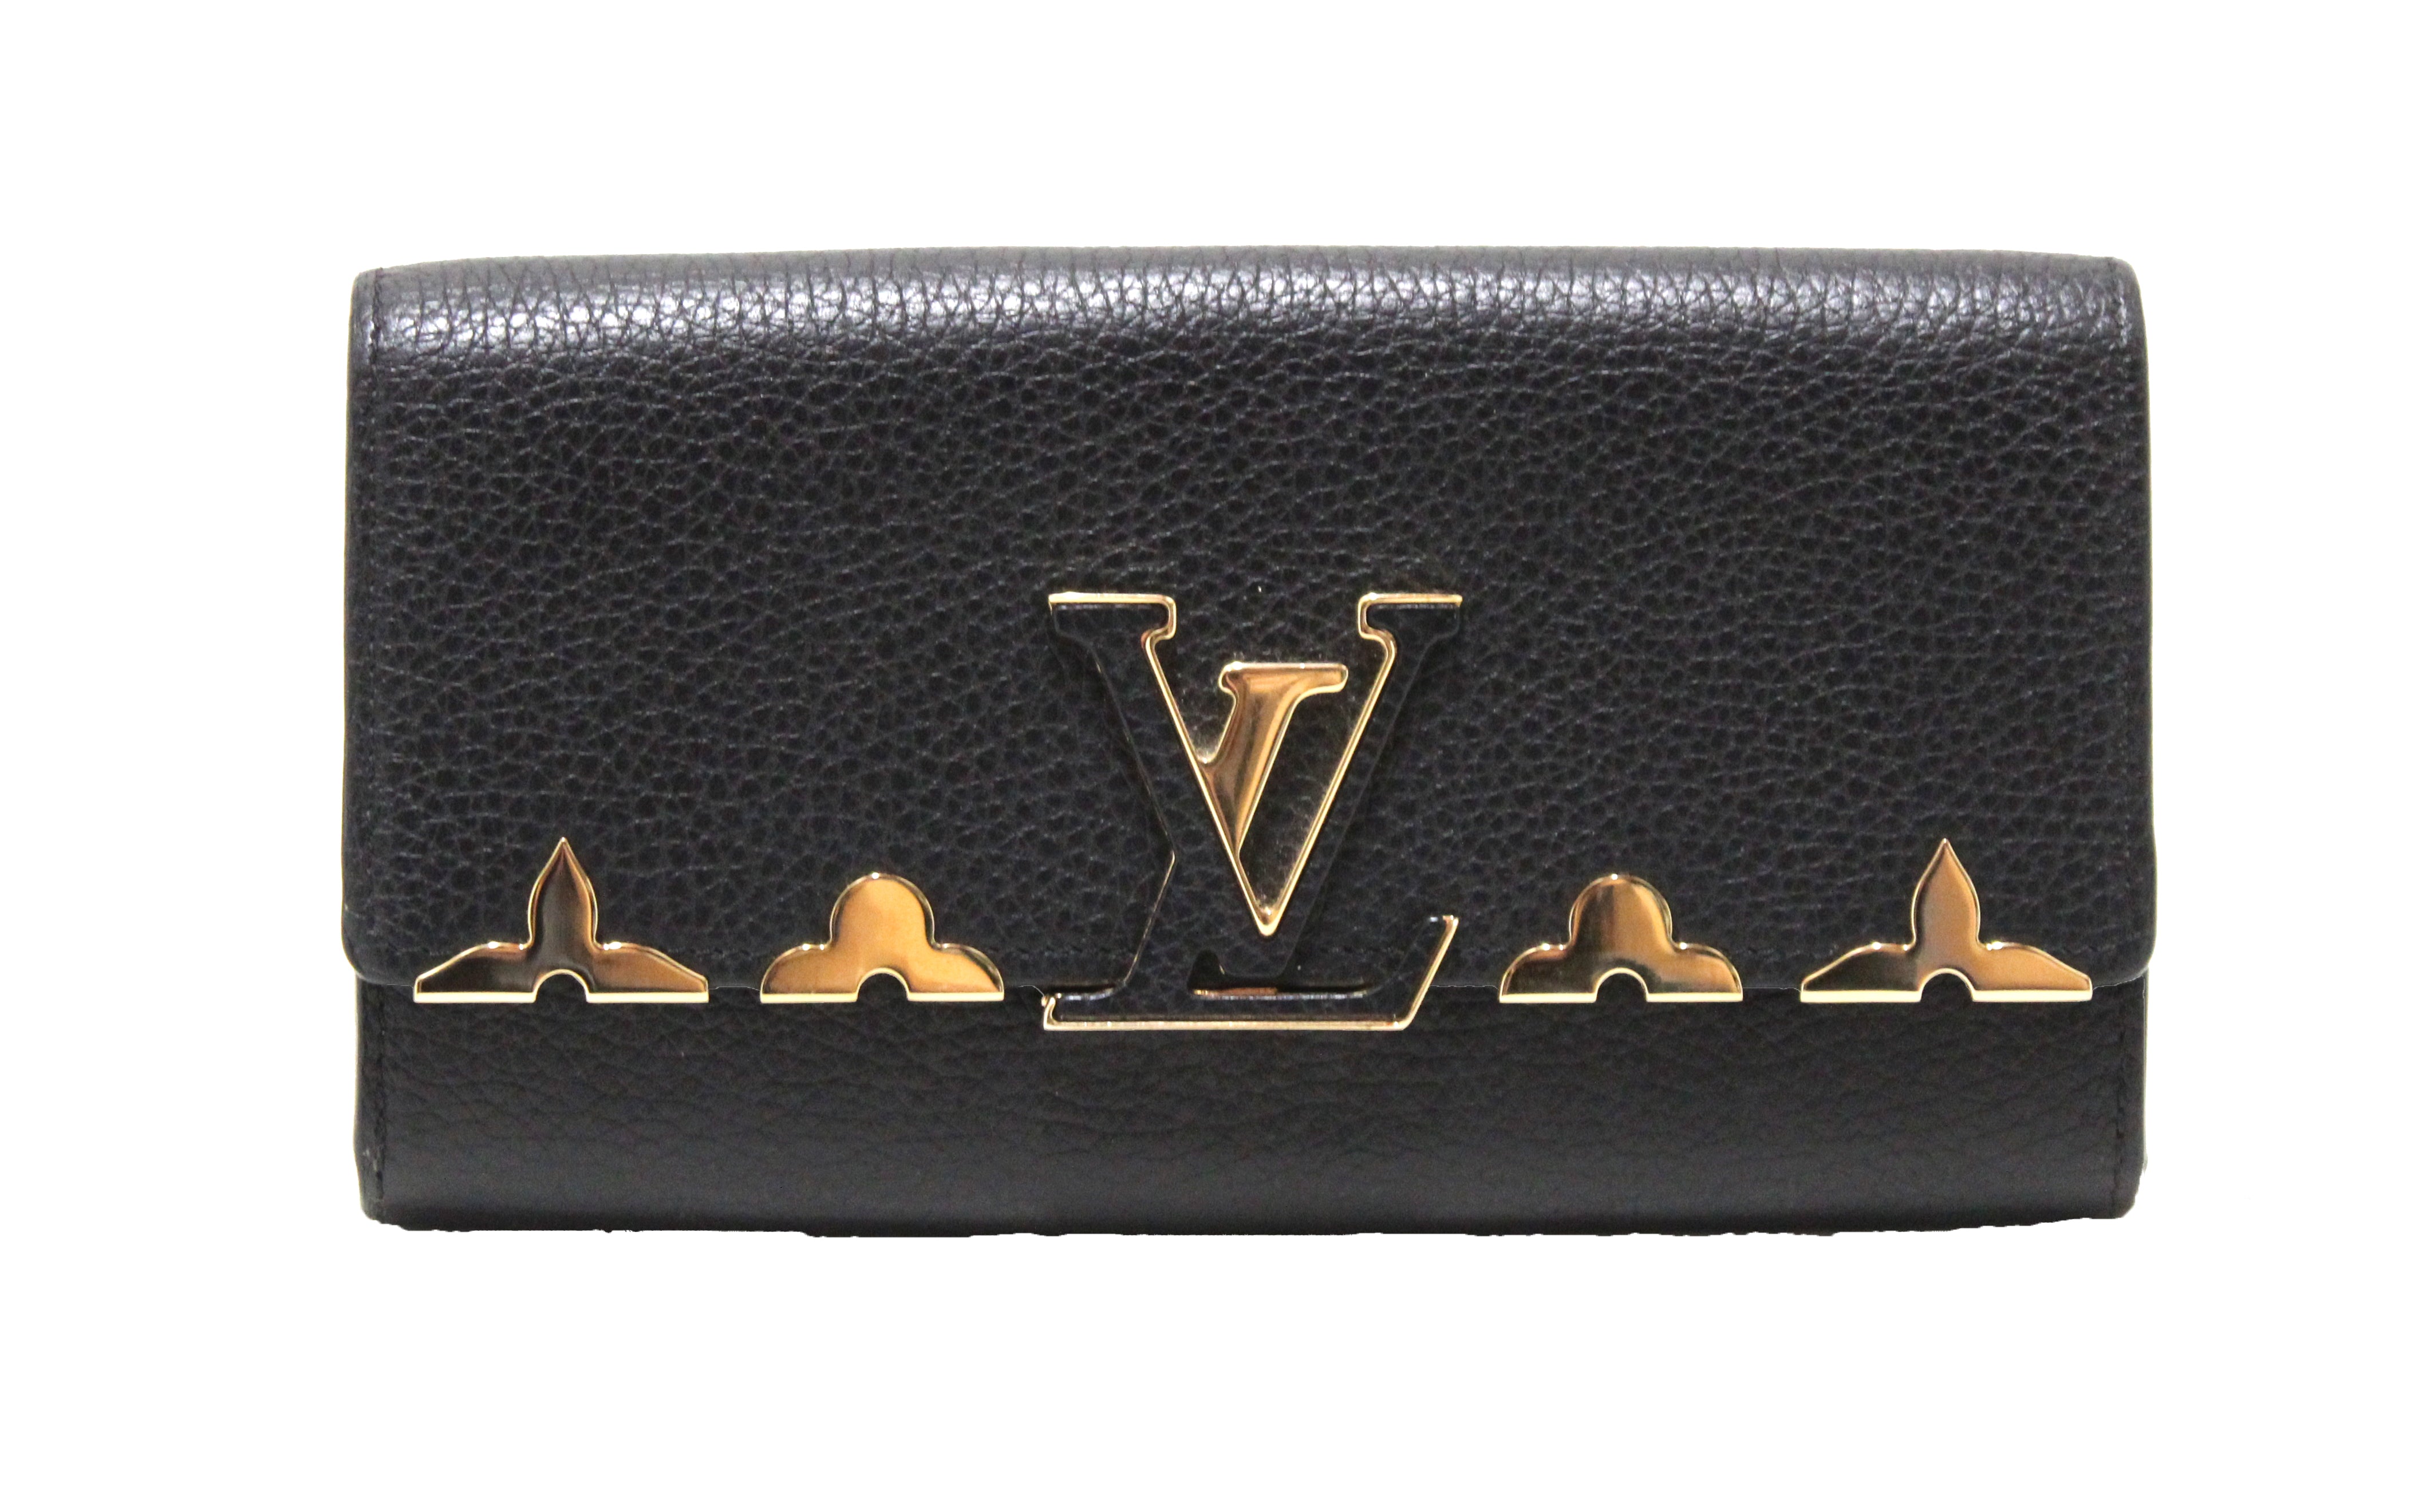 Only 958.00 usd for LOUIS VUITTON Black Taurillon Leather